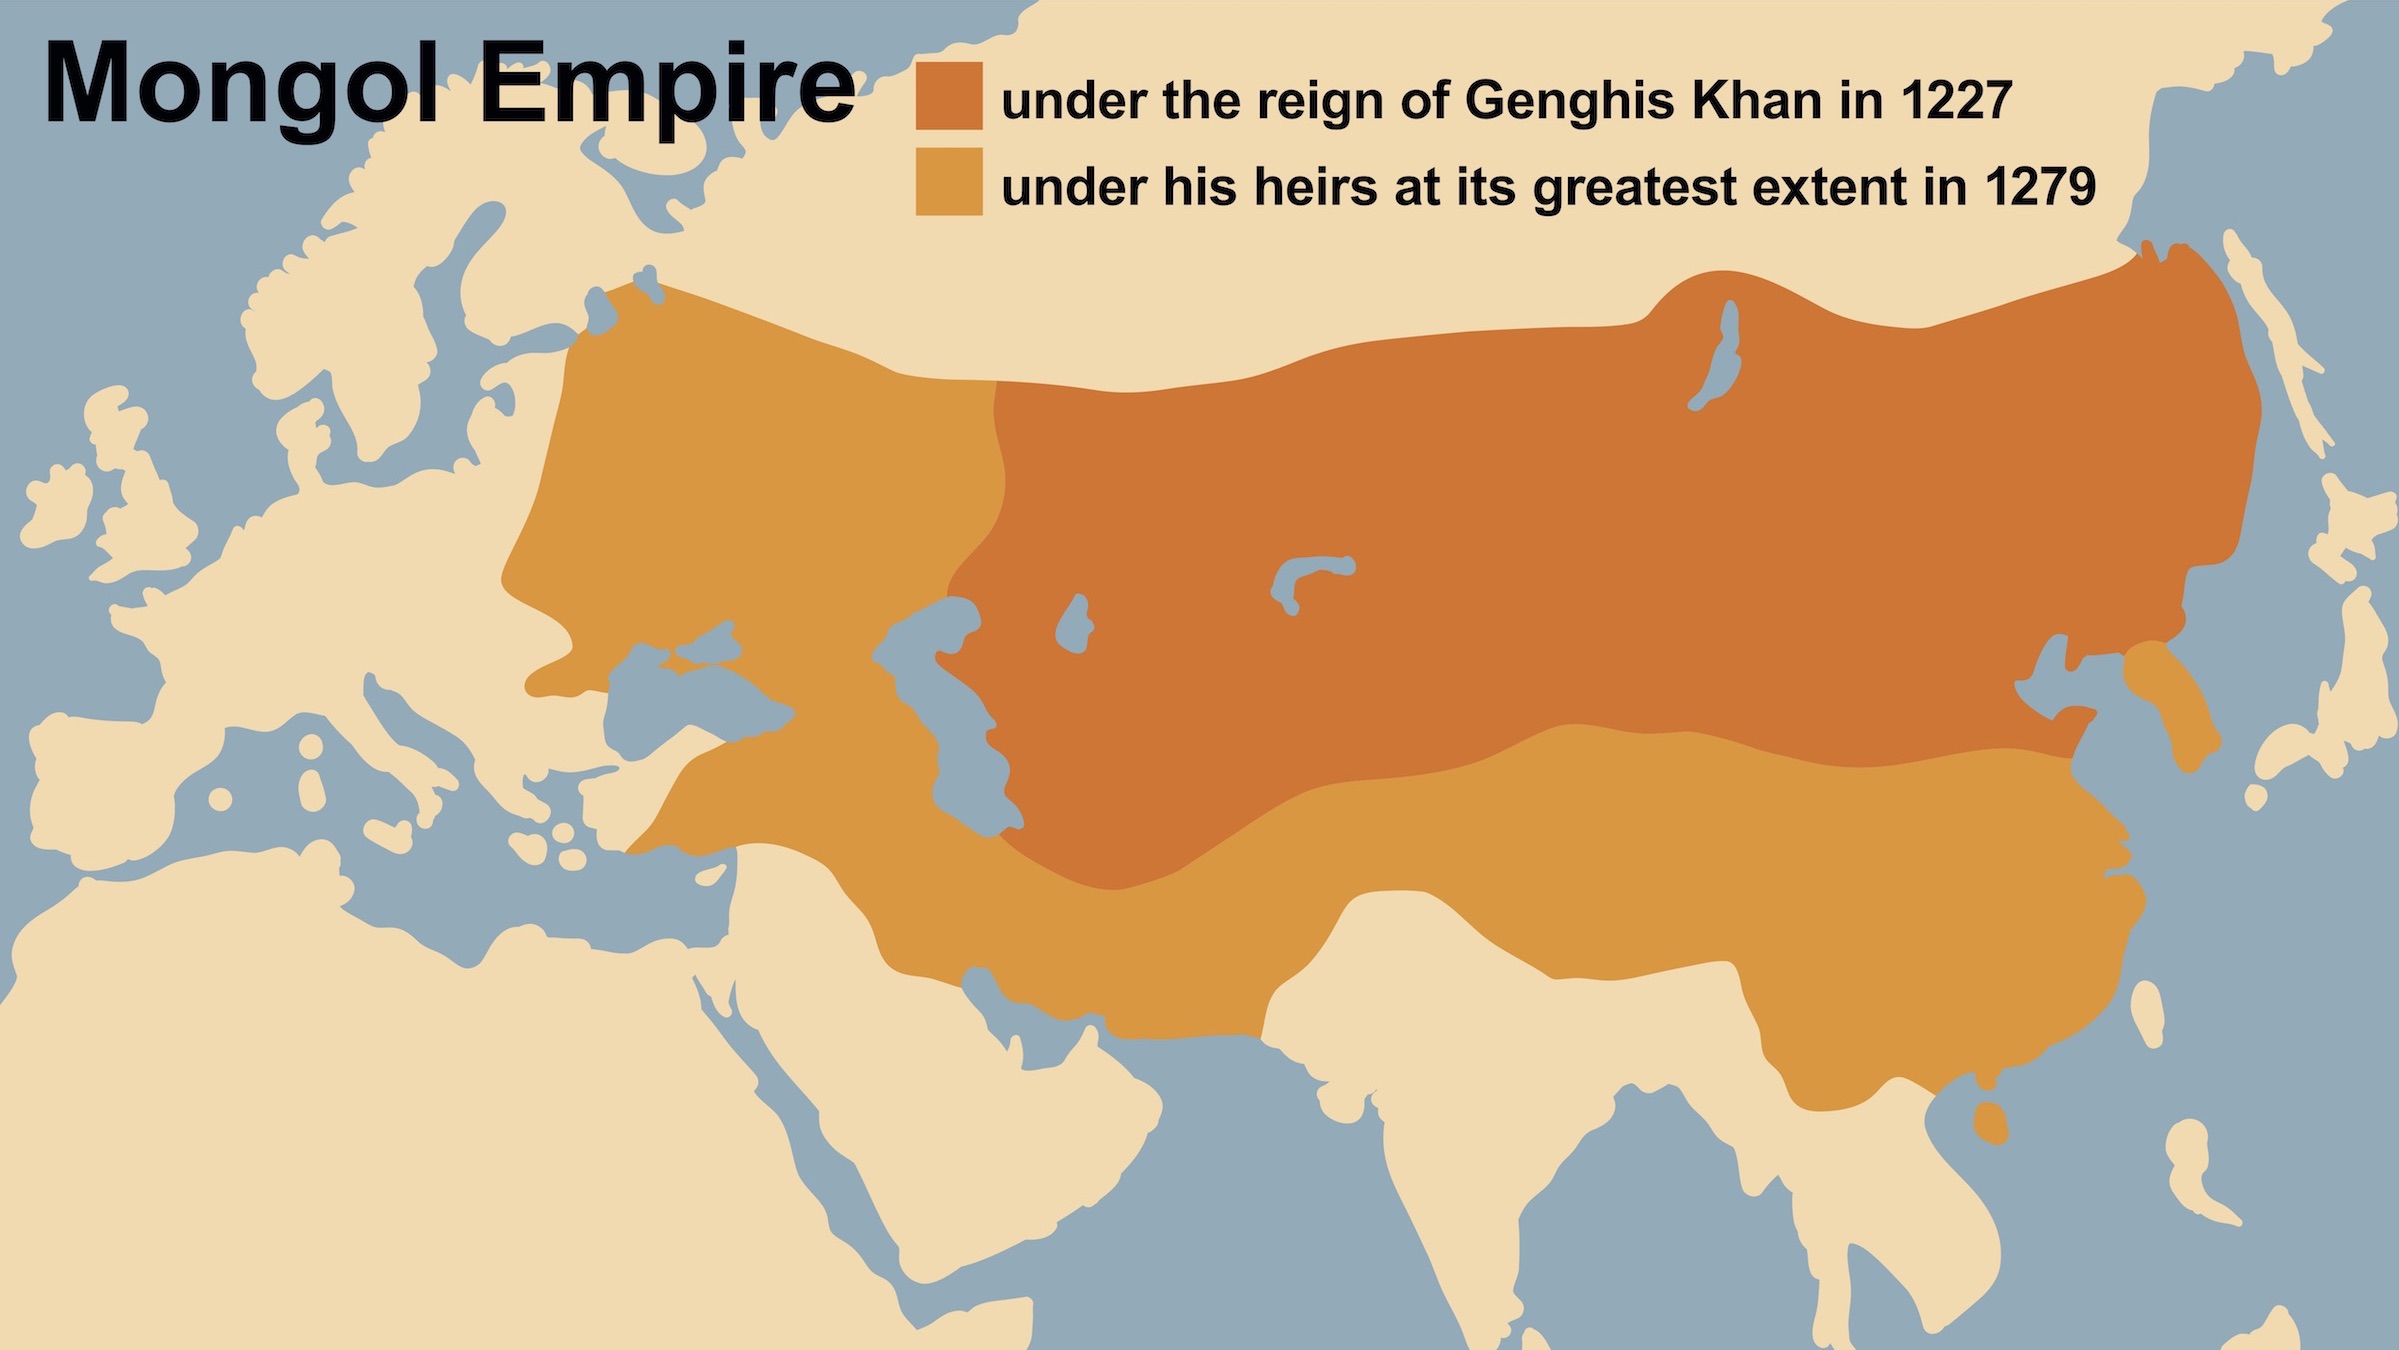 Genghis Khan's Mongol Empire in 1227 and at its greatest extent in 1279.